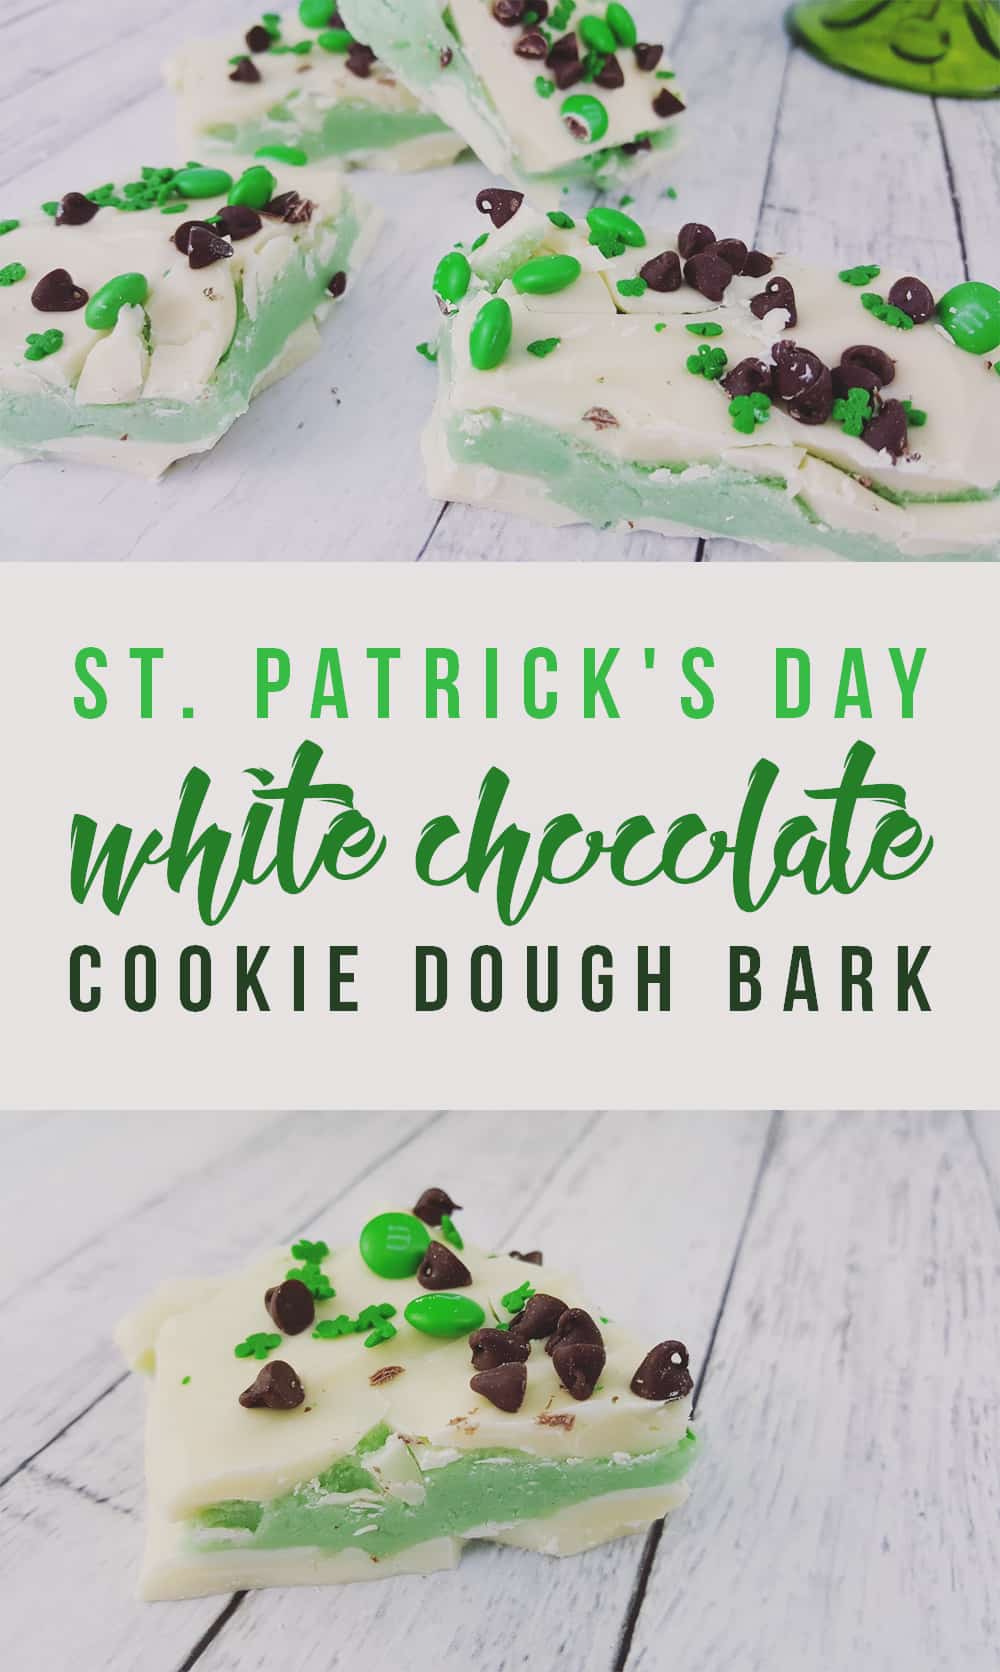 Need some St. Patrick's Day candy? You've got to make this St. Patrick's Day Bark recipe! It's a fun, festive cookie dough bark that tastes delicious!